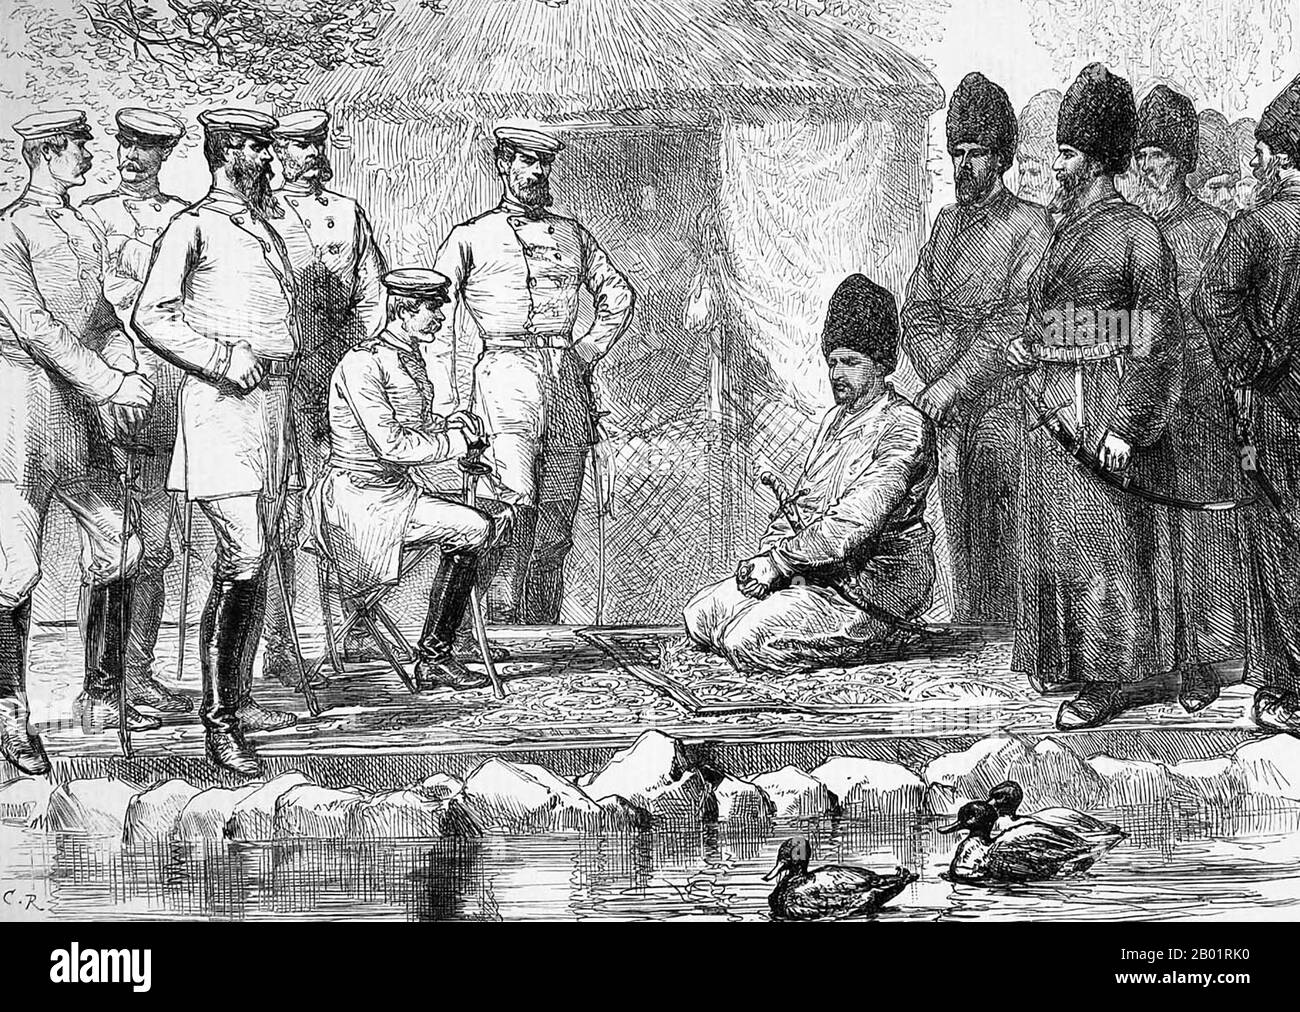 Uzbekistan: 'Interview Between General Kaufmann And The Khan Of Khiva, 12 August 1873'. Engraving from 'L'UNIVERS ILLUSTRE', 1873.  As soon as the Russian conquest of the Caucasus was completed in the late 1850s, the Russian Ministry of War began to send military forces against the Central Asian khanates. Three major population centers of the khanates - Tashkent, Bukhara, and Samarkand - were captured in 1865, 1867, and 1868, respectively. In 1868 the Khanate of Bukhara signed a treaty with Russia making Bukhara a Russian protectorate. while Khiva became a Russian protectorate in 1873. Stock Photo